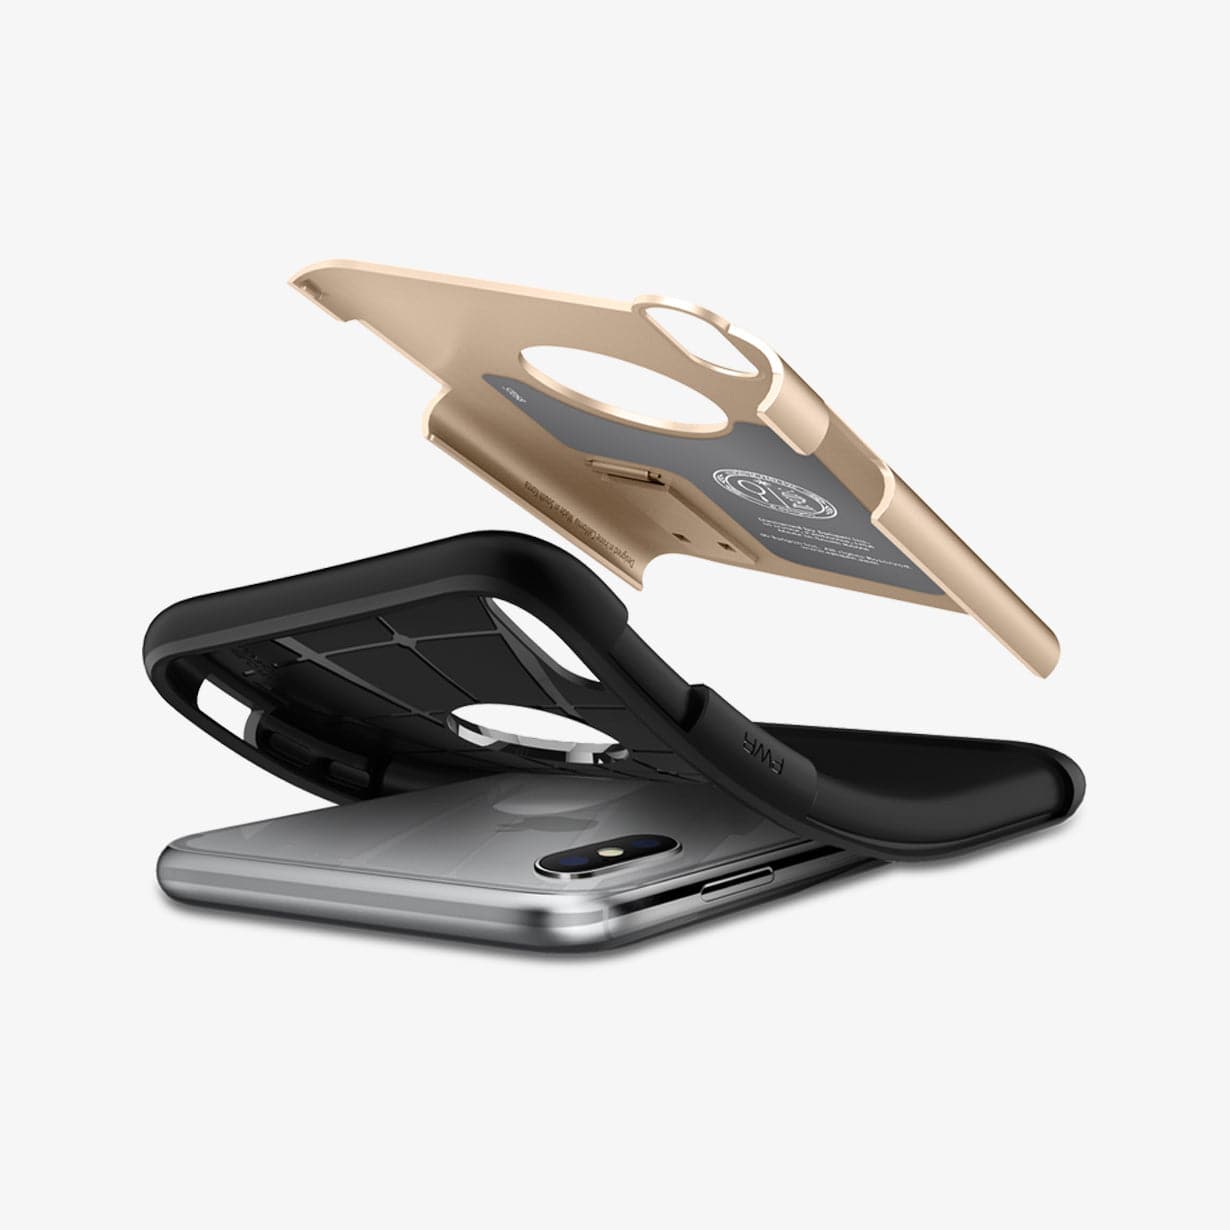 063CS24516 - iPhone XS Case Slim Armor in champagne gold showing the case bending away from device and hard pc hovering above